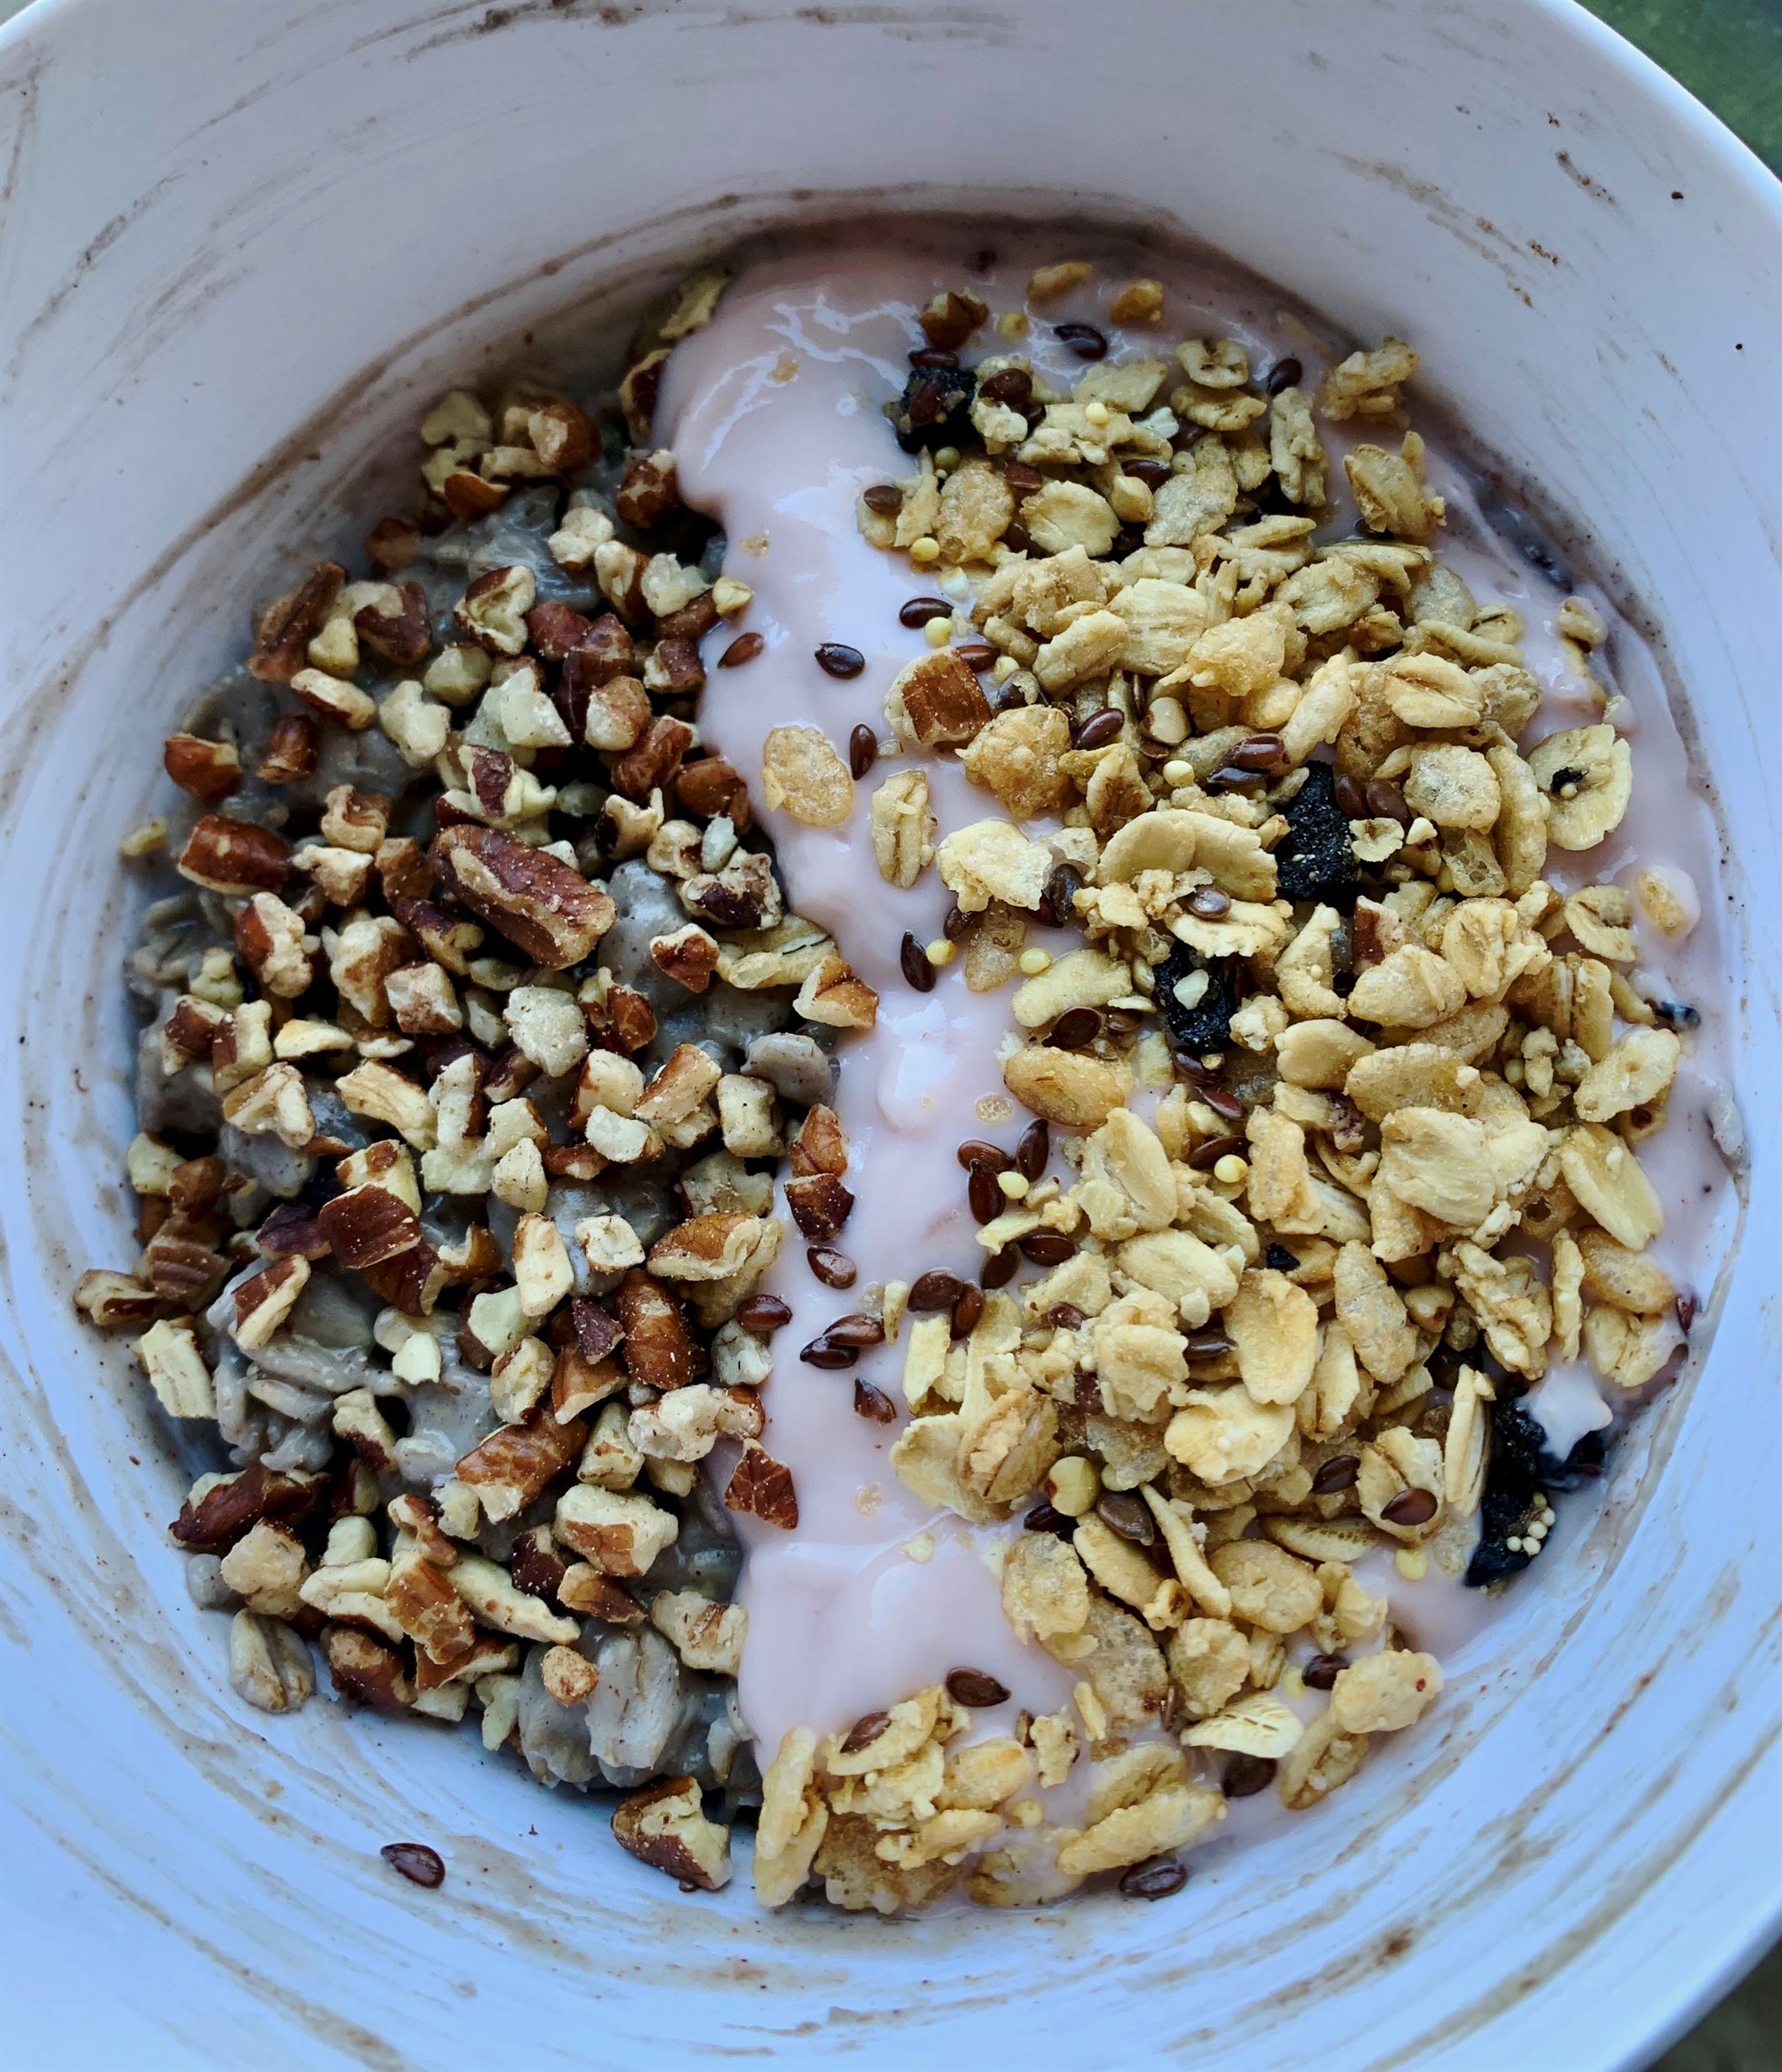 This is high protein oatmeal featuring yogurt, granola and roasted pecans as a topping. Samantha Bailey | The Montclarion